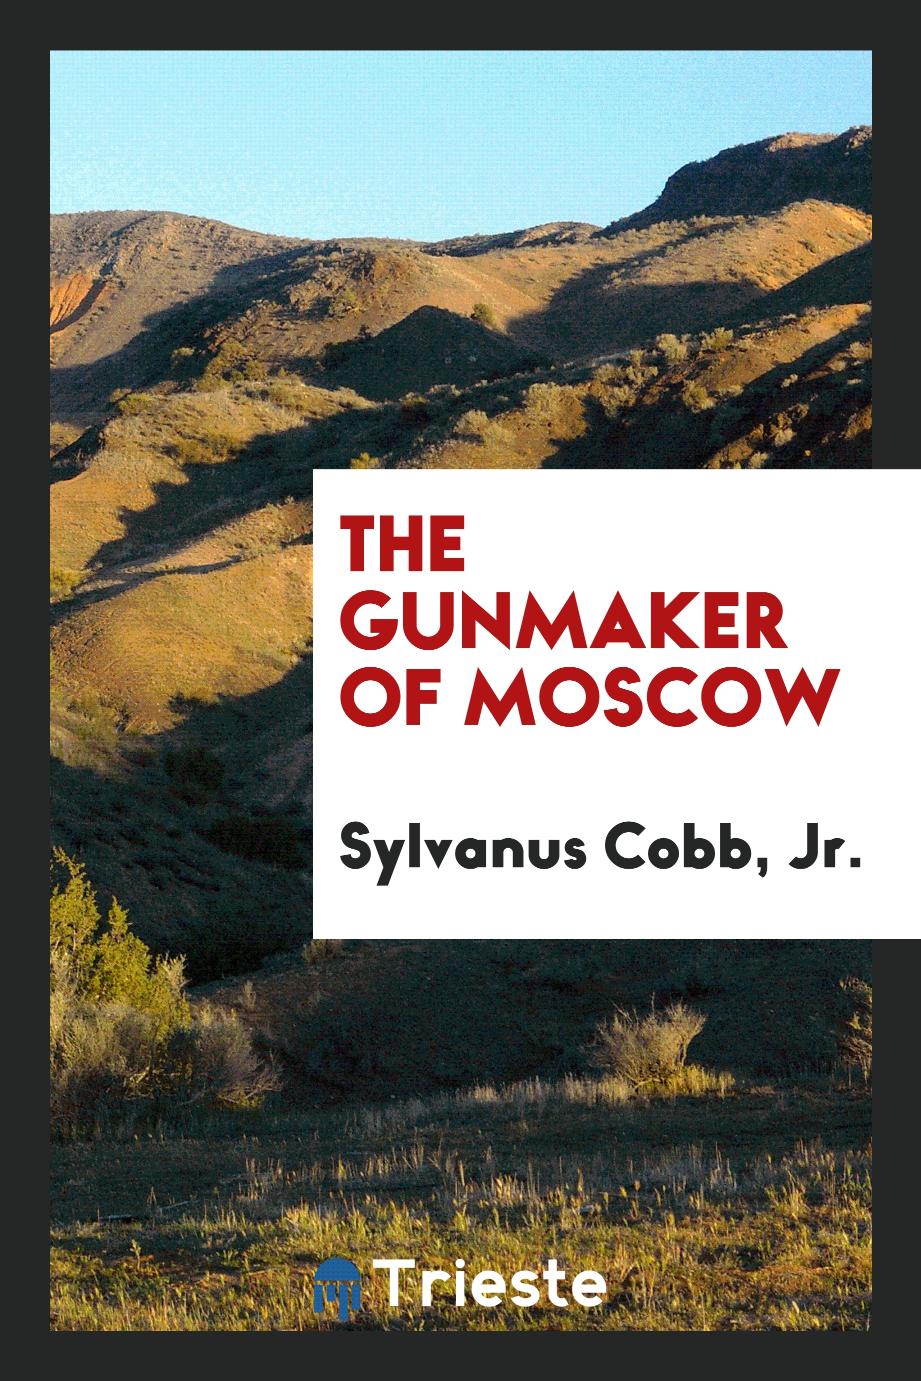 The Gunmaker of Moscow